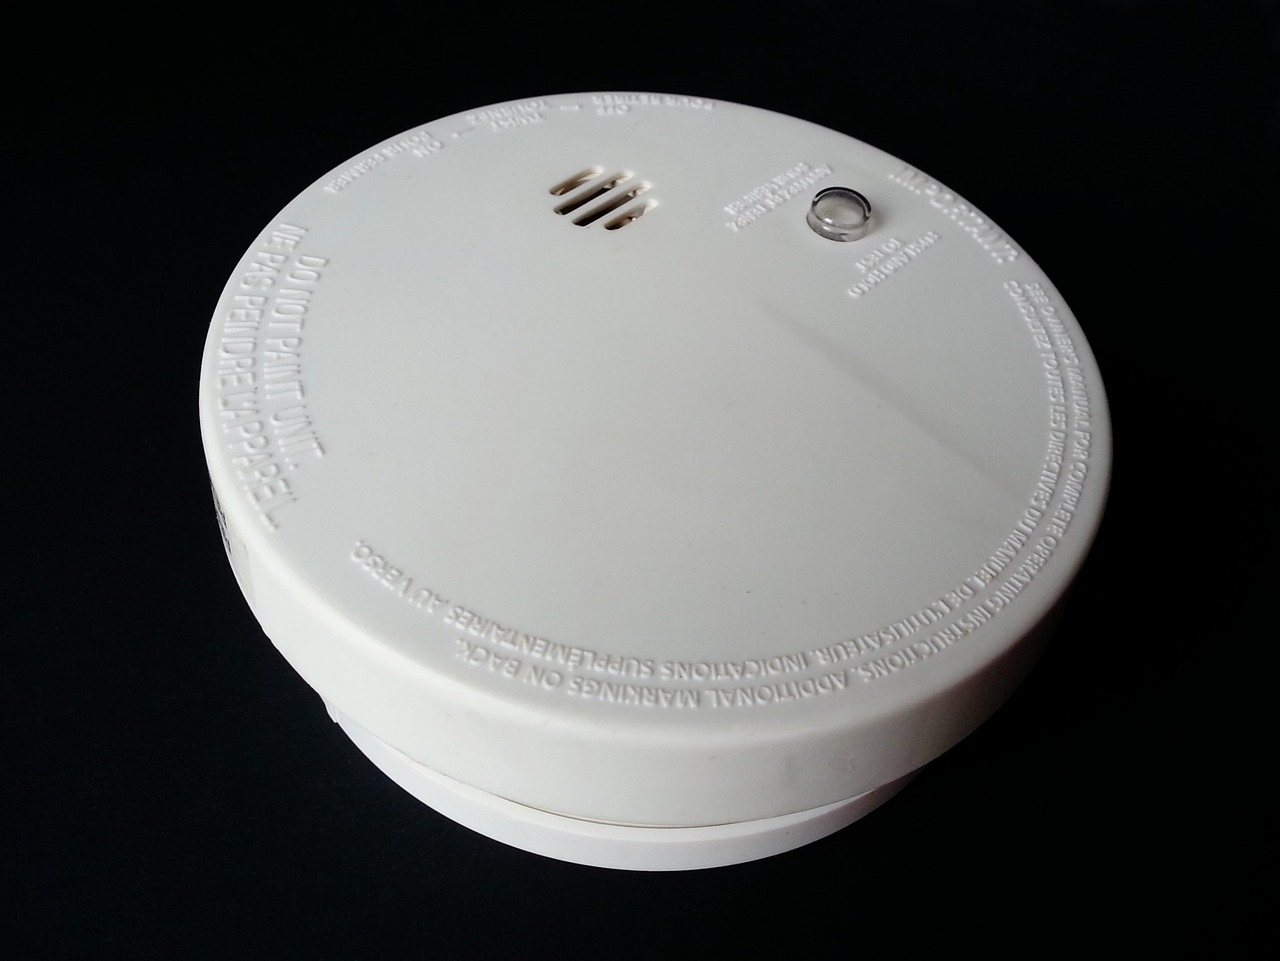 How To Unplug A Smoke Detector In 10 Steps